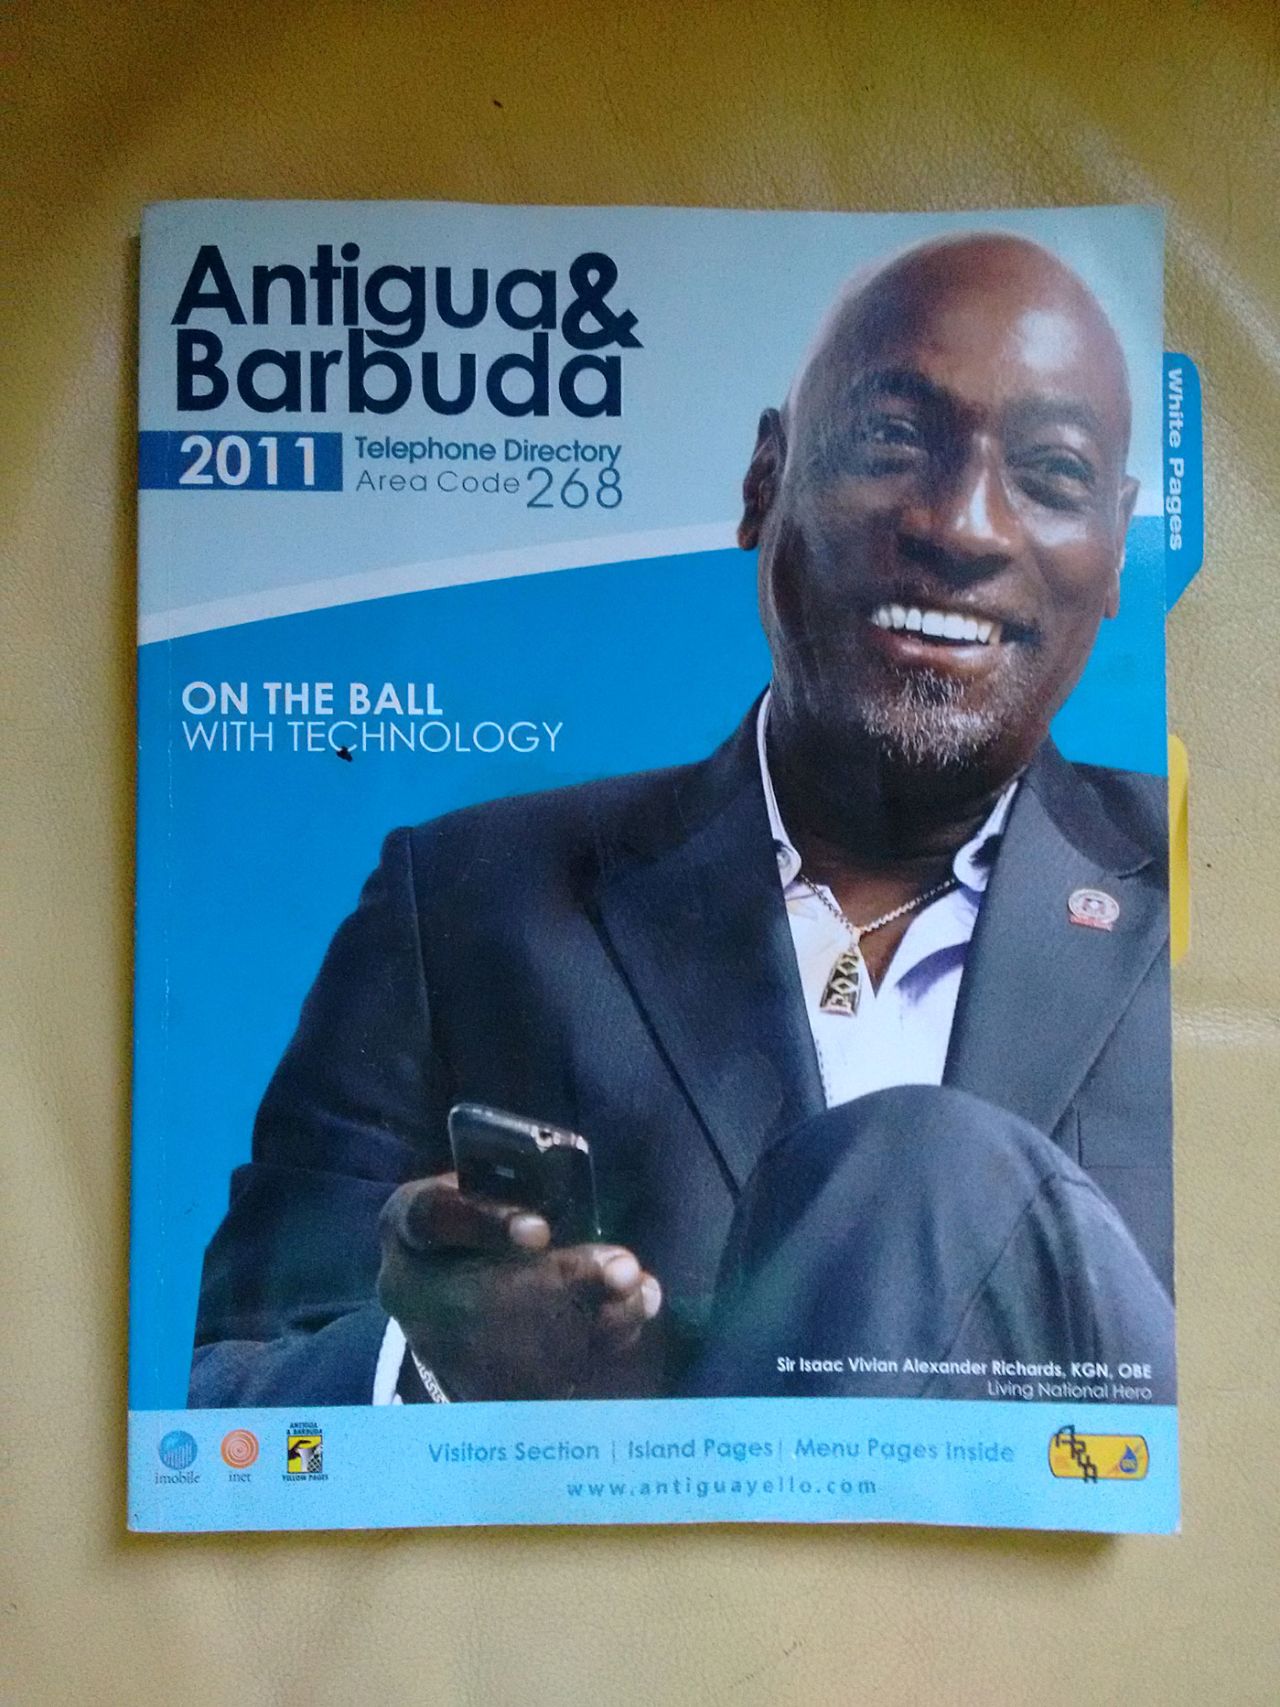 Viv Richards on the cover of the Antigua phone directory, St John's, July 22, 2016